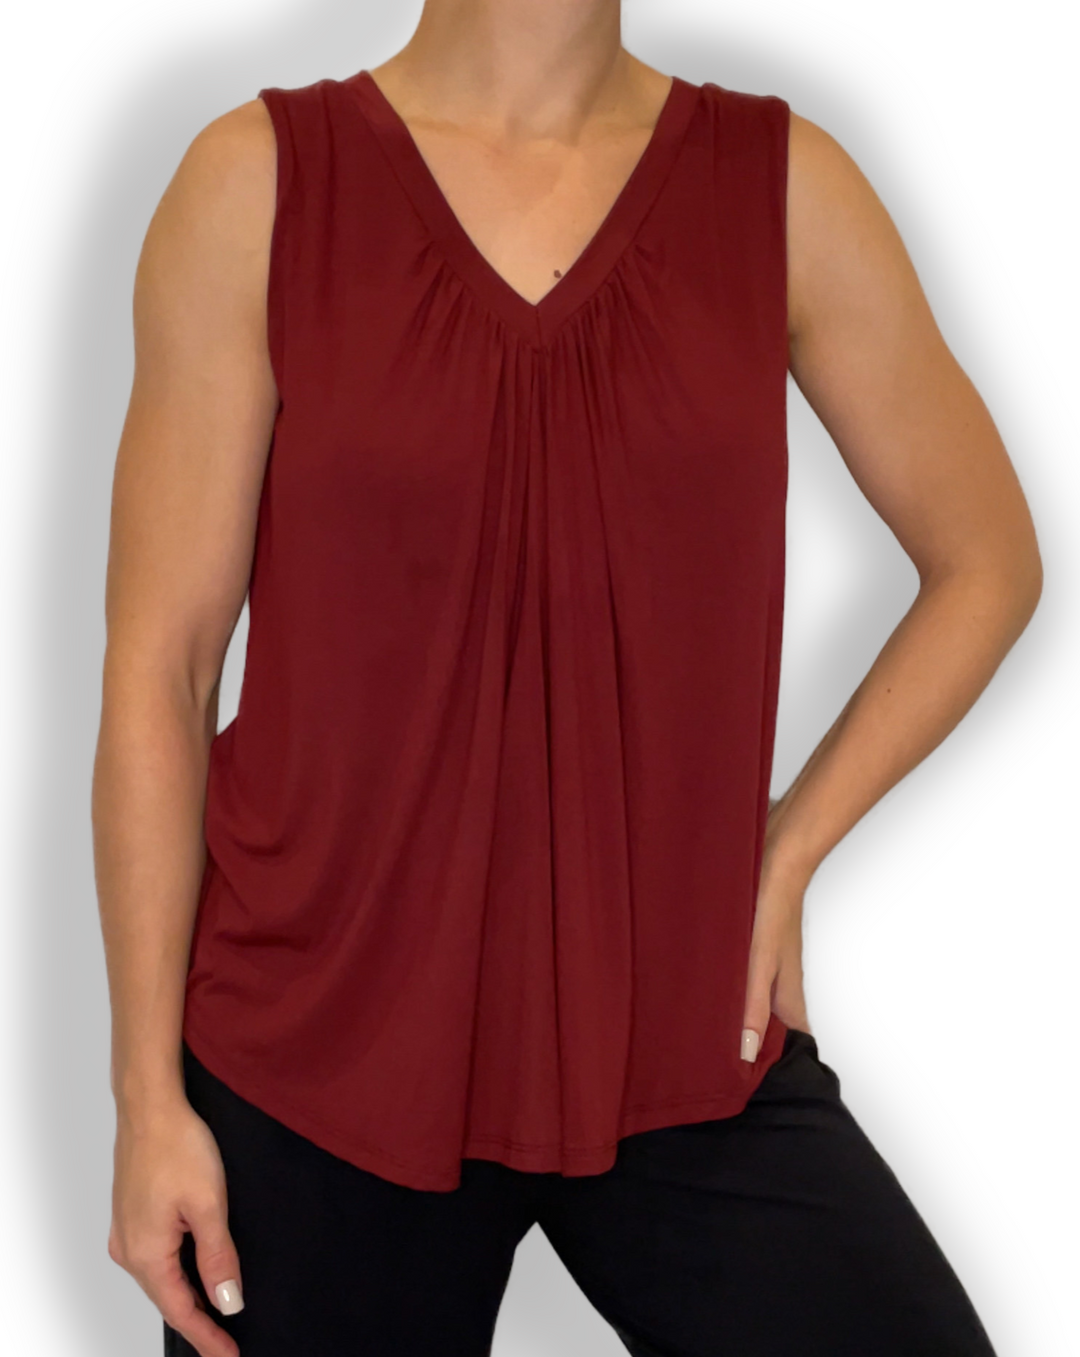 Fabletics Kathie High Neck Sleeveless Ruched Top